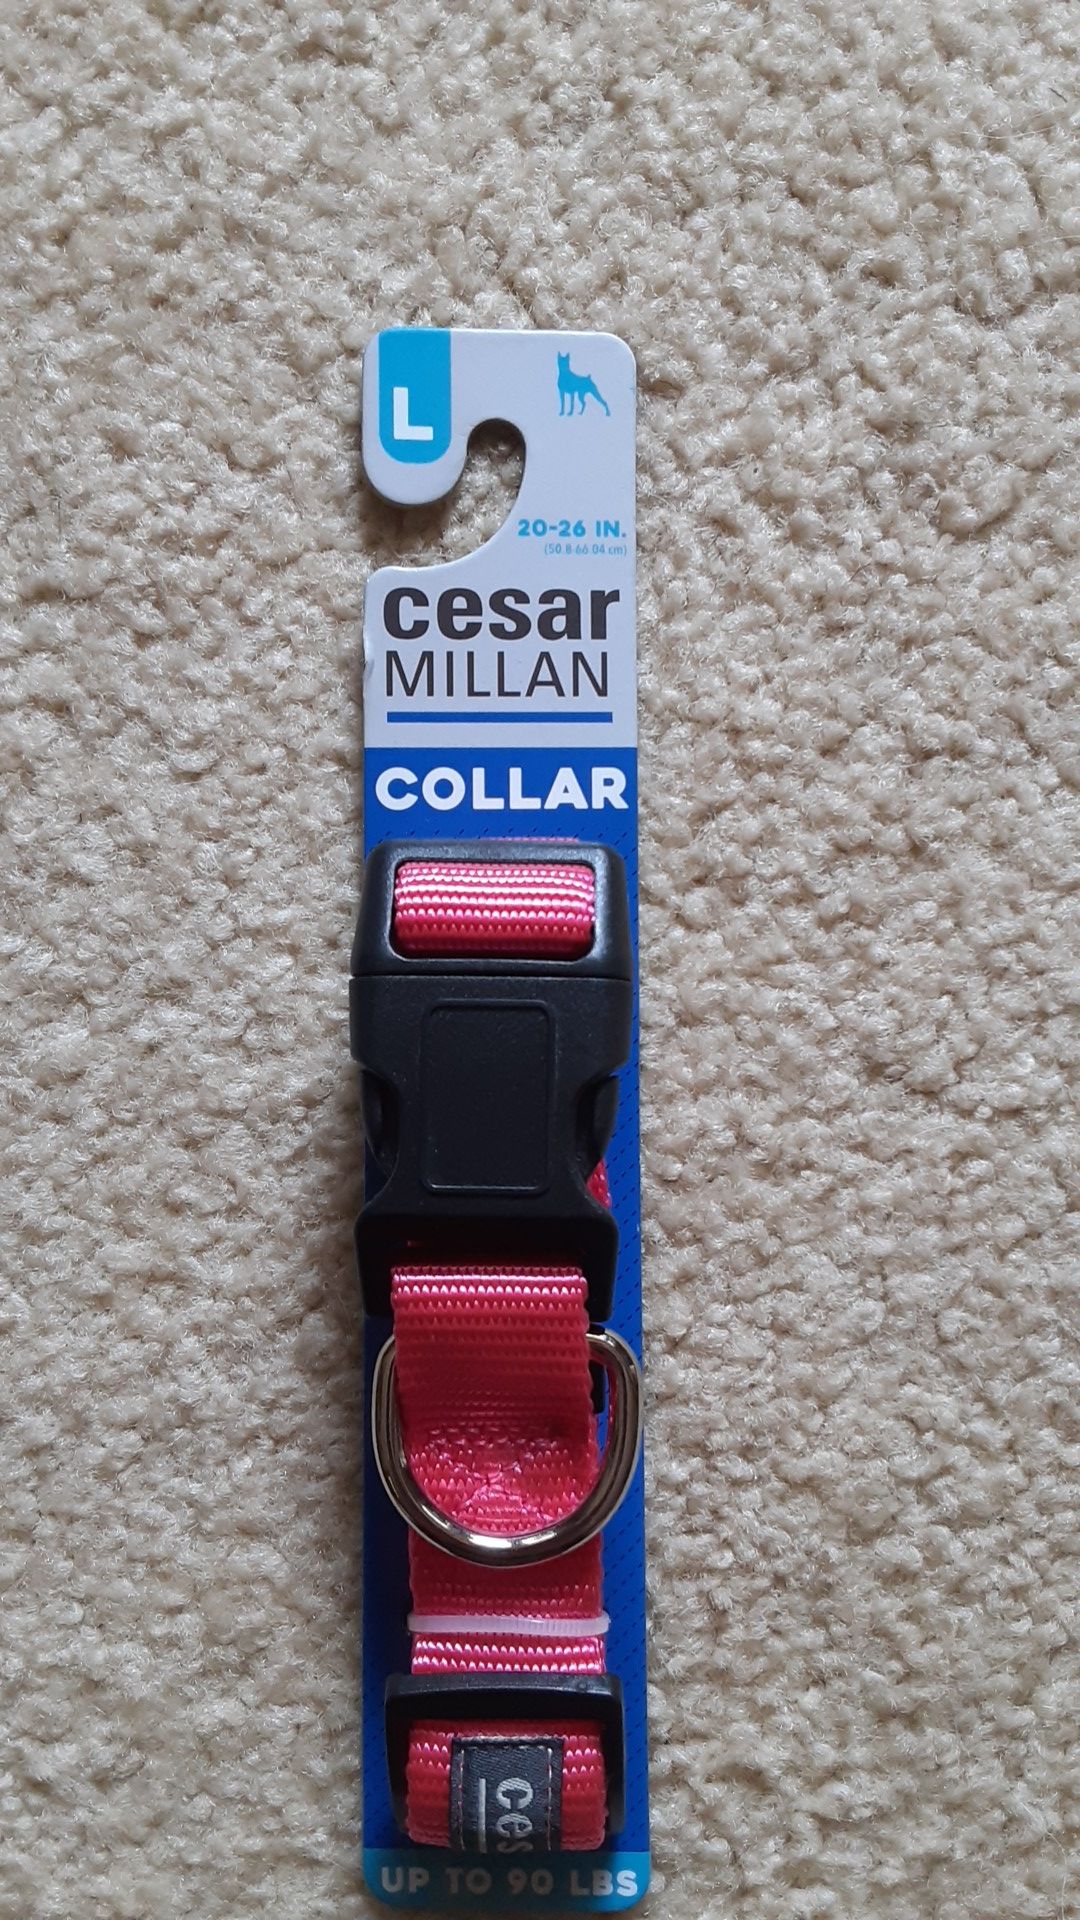 Cesar Millan pink collar for dogs up to 90lbs, adjustable to neck size of 20-26"